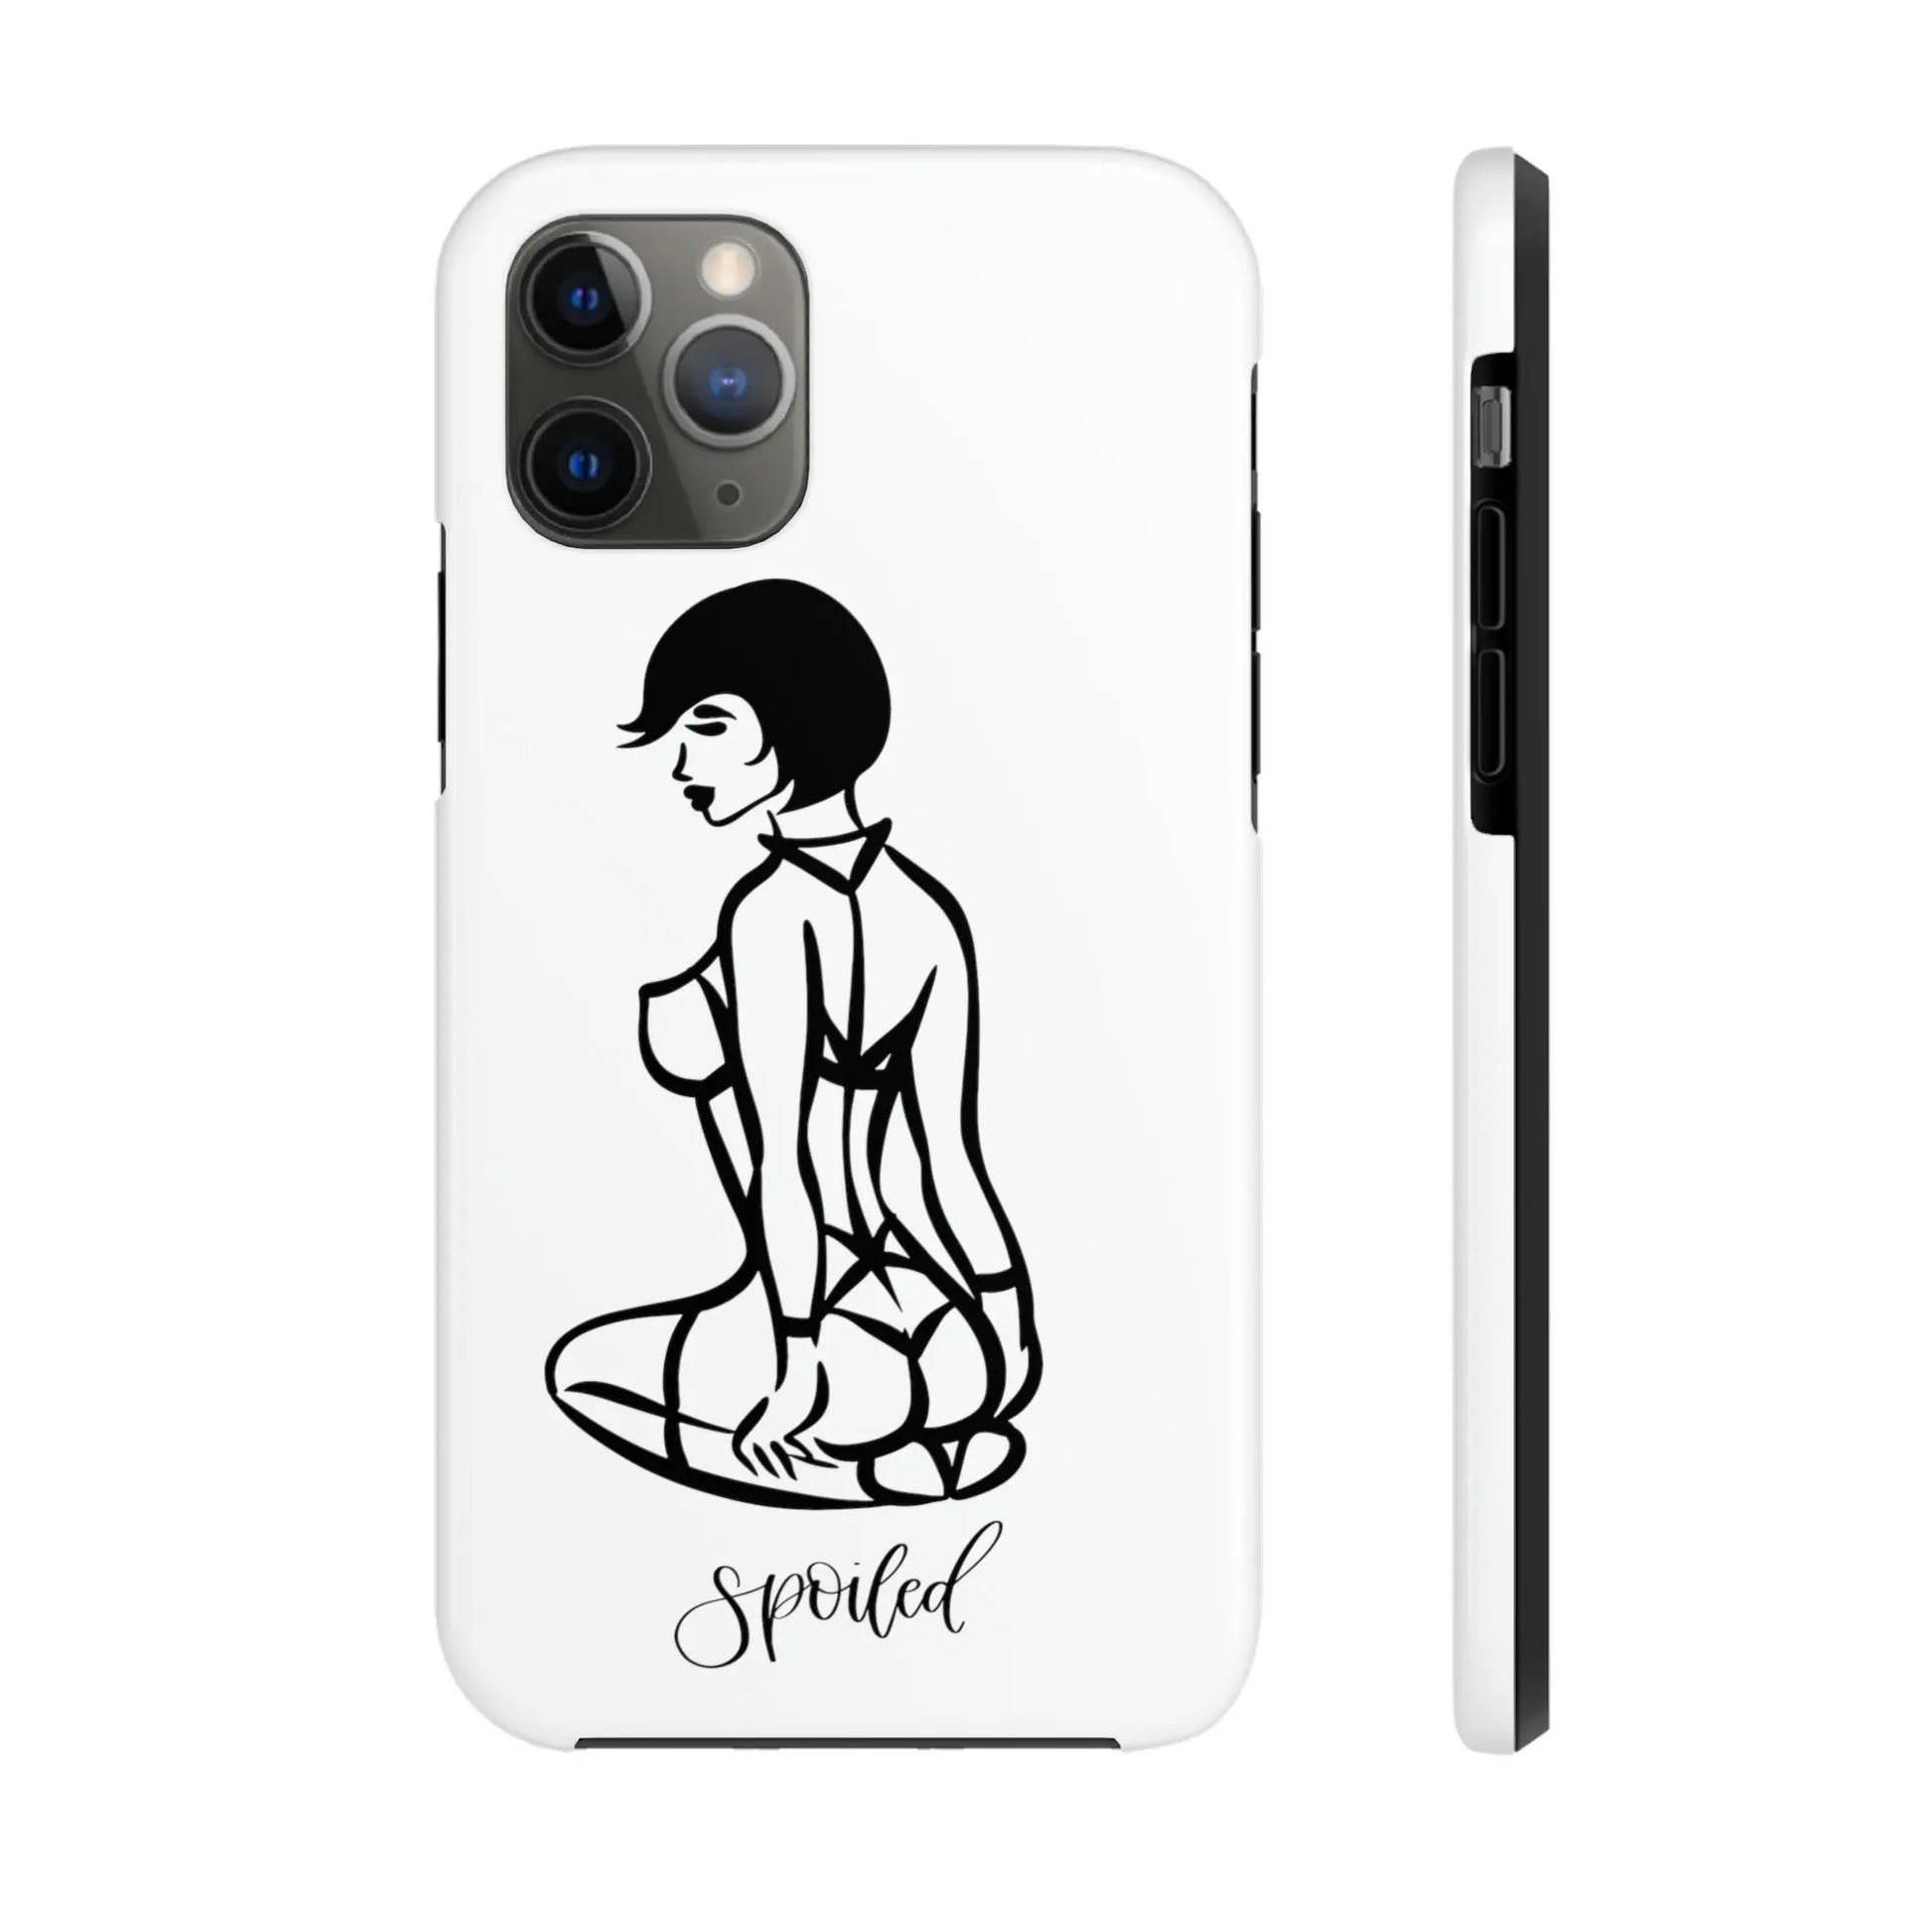 Spoiled & Bound Tough Phone Case iPhone 11 Pro